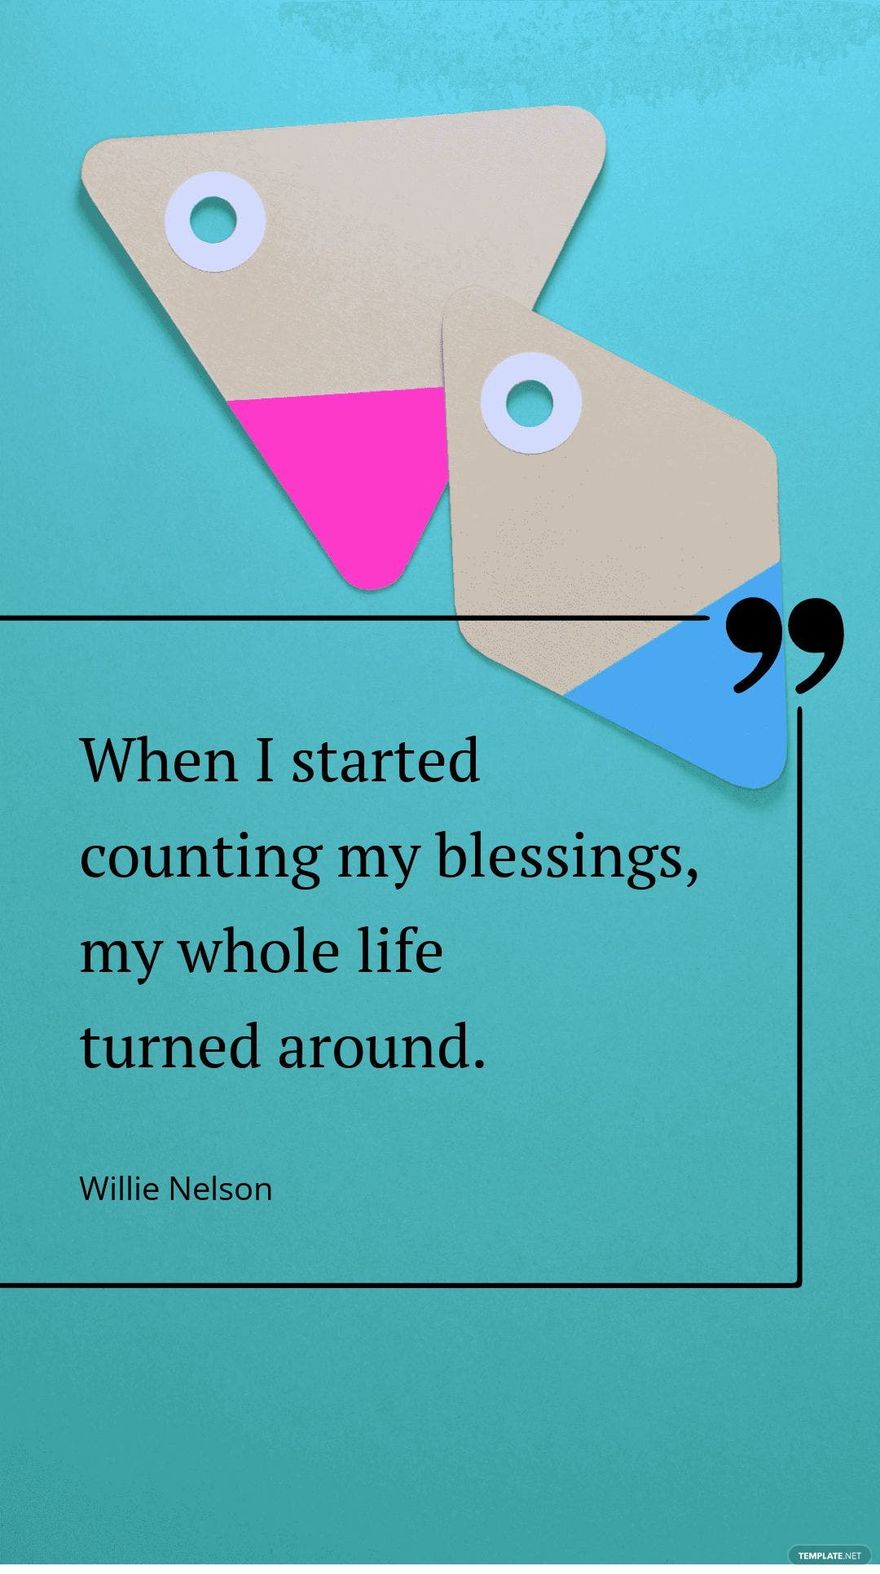 Willie Nelson - When I started counting my blessings, my whole life turned around.